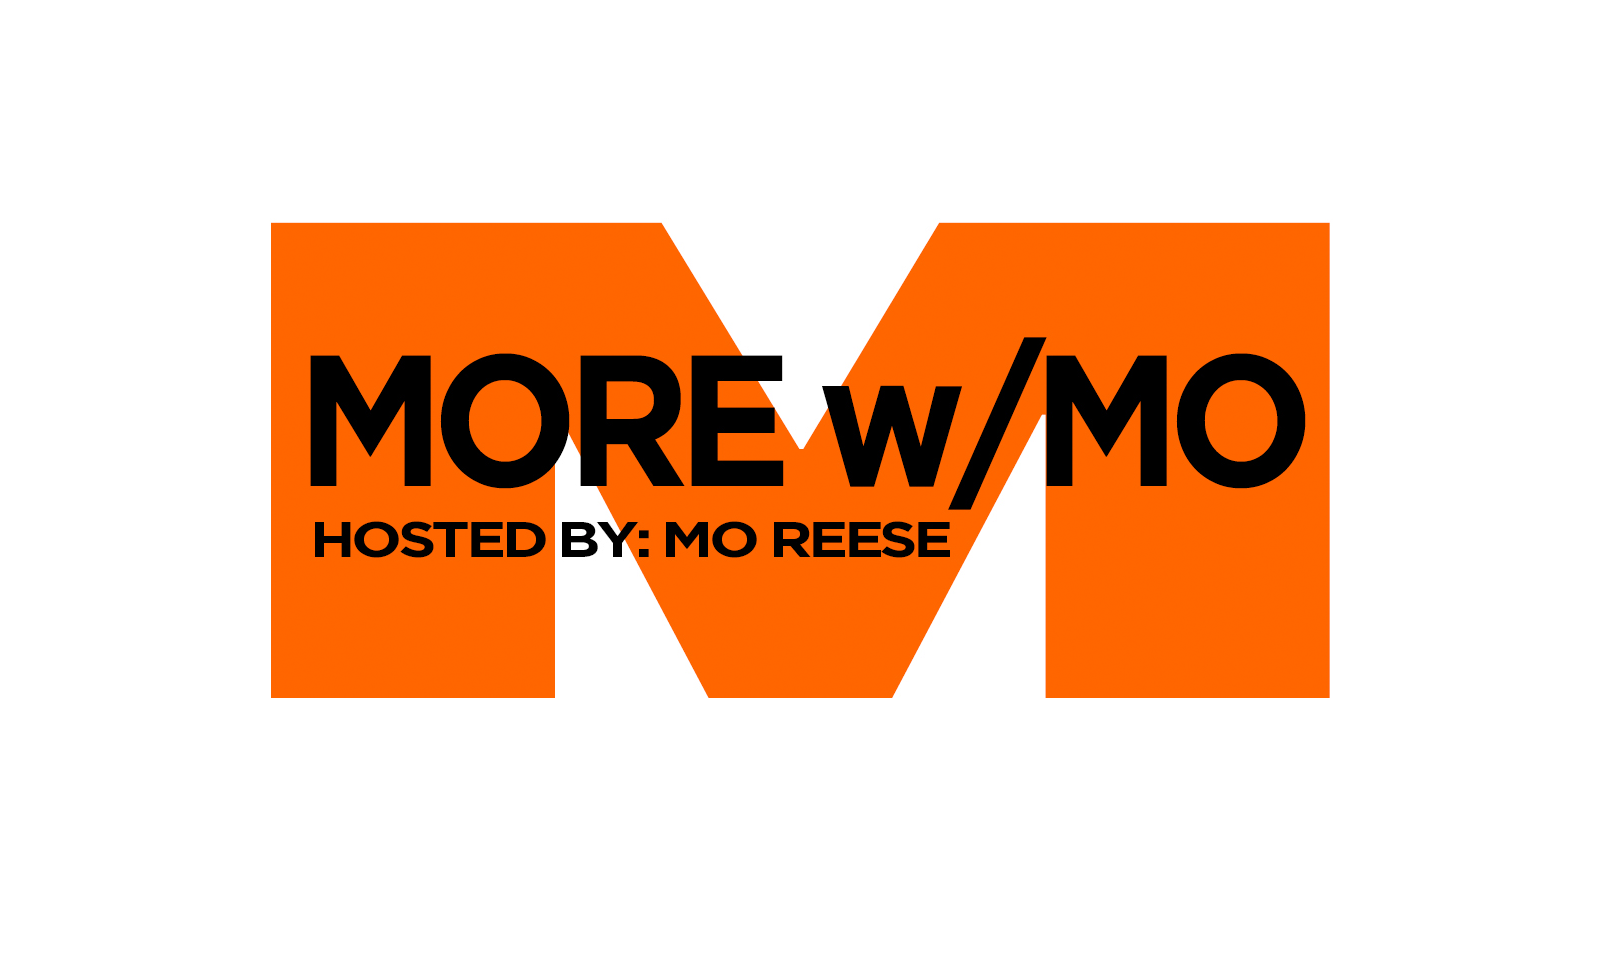 Mo Reese’s 'MORE w/Mo' Podcast Returns